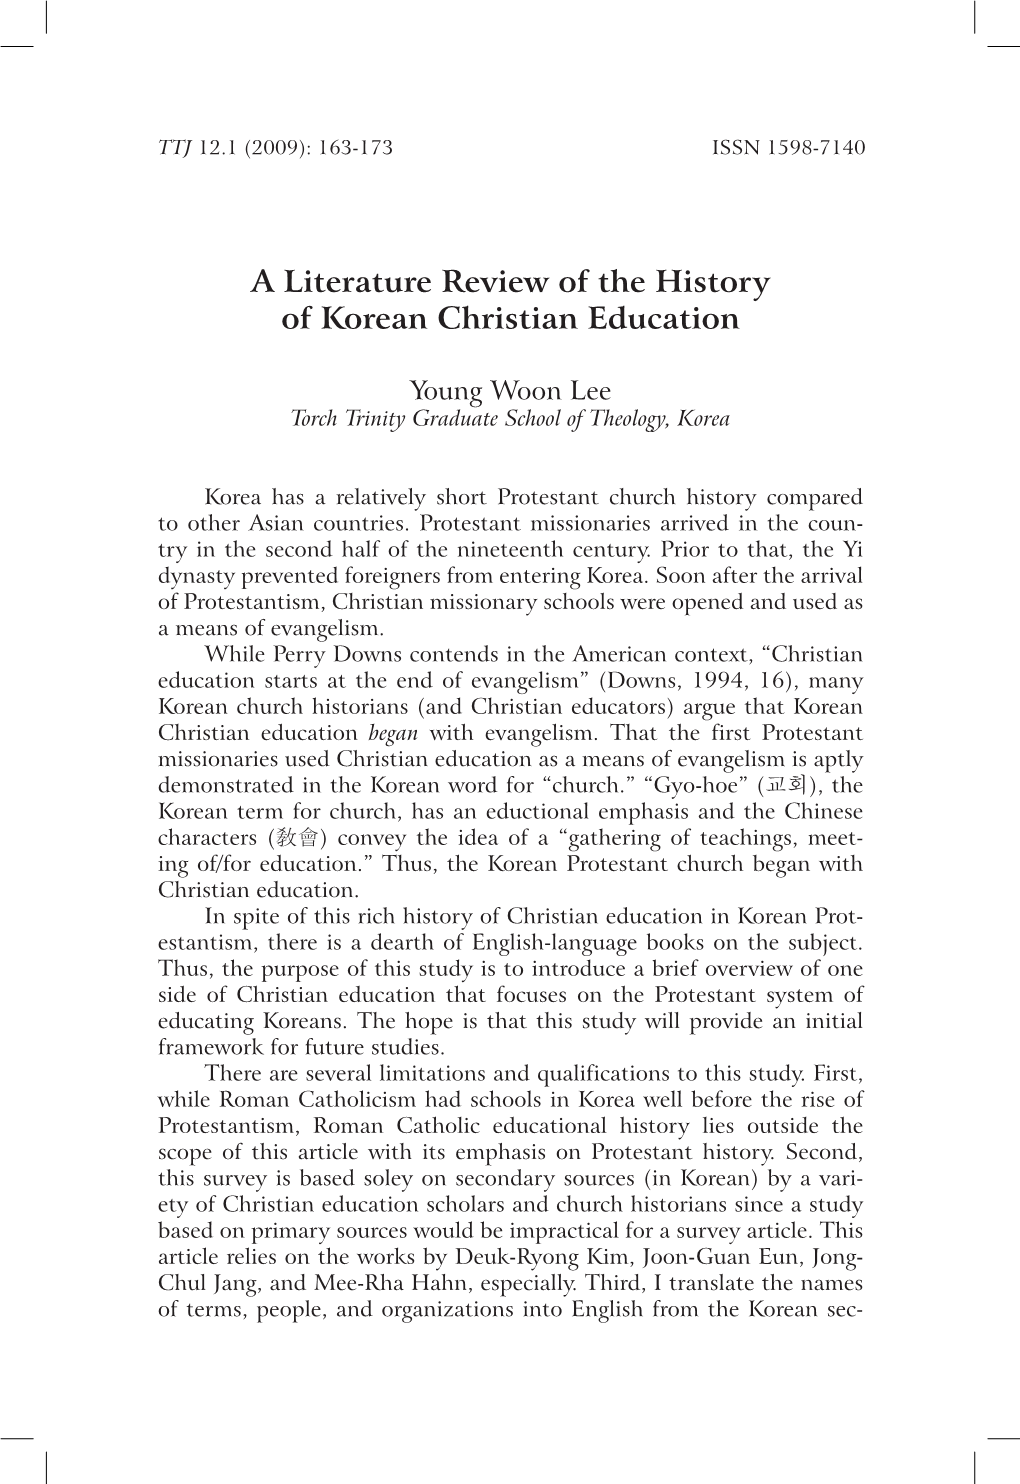 A Literature Review of the History of Korean Christian Education